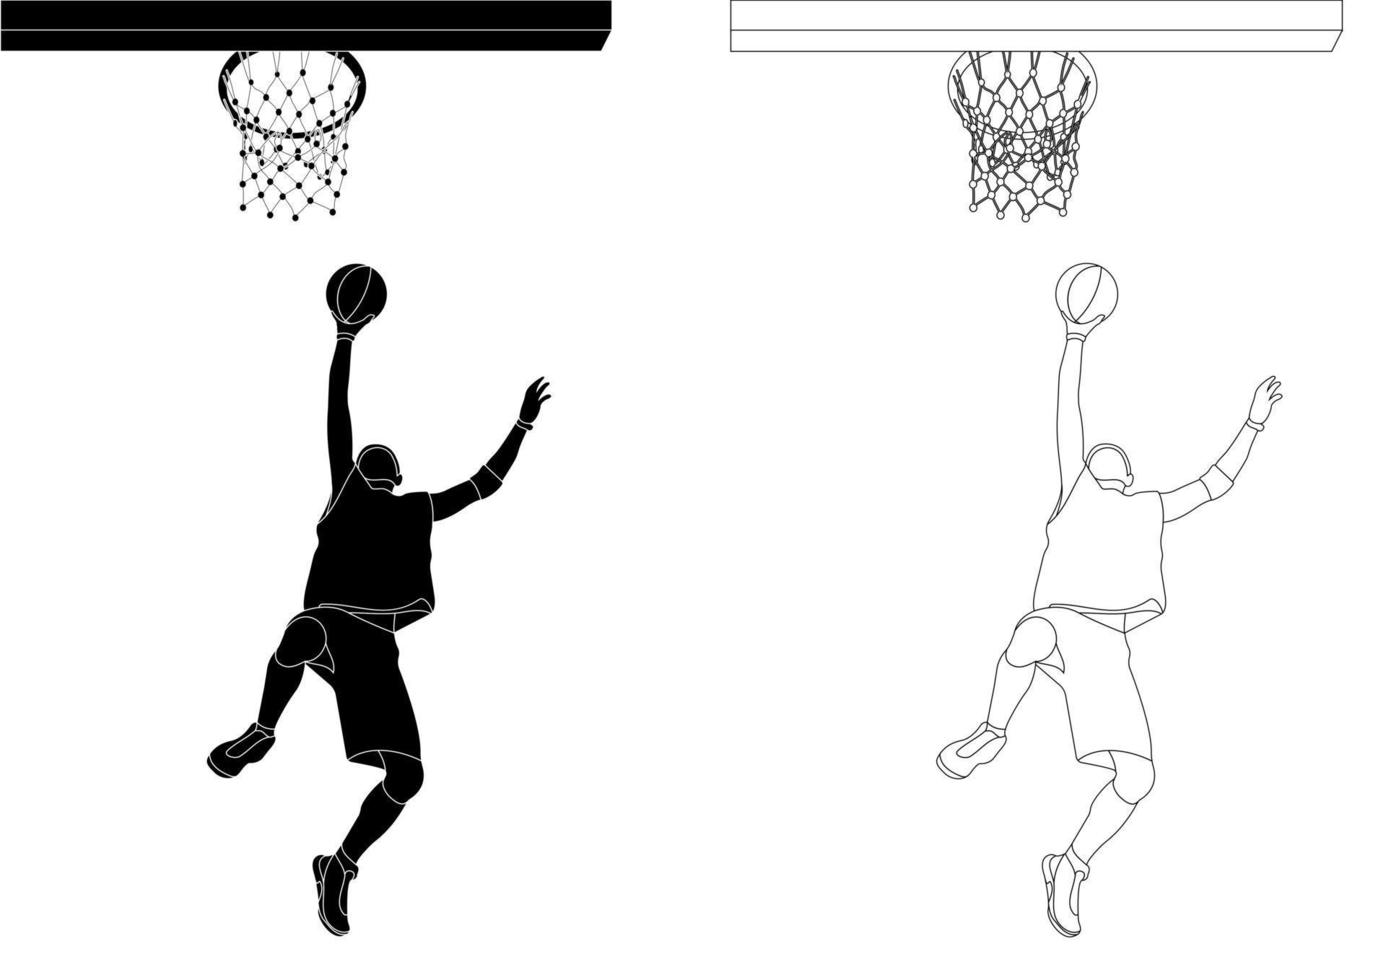 Sketch outline black and white silhouette of an athlete basketball player in a ball game. Basketball. Ring throw. vector